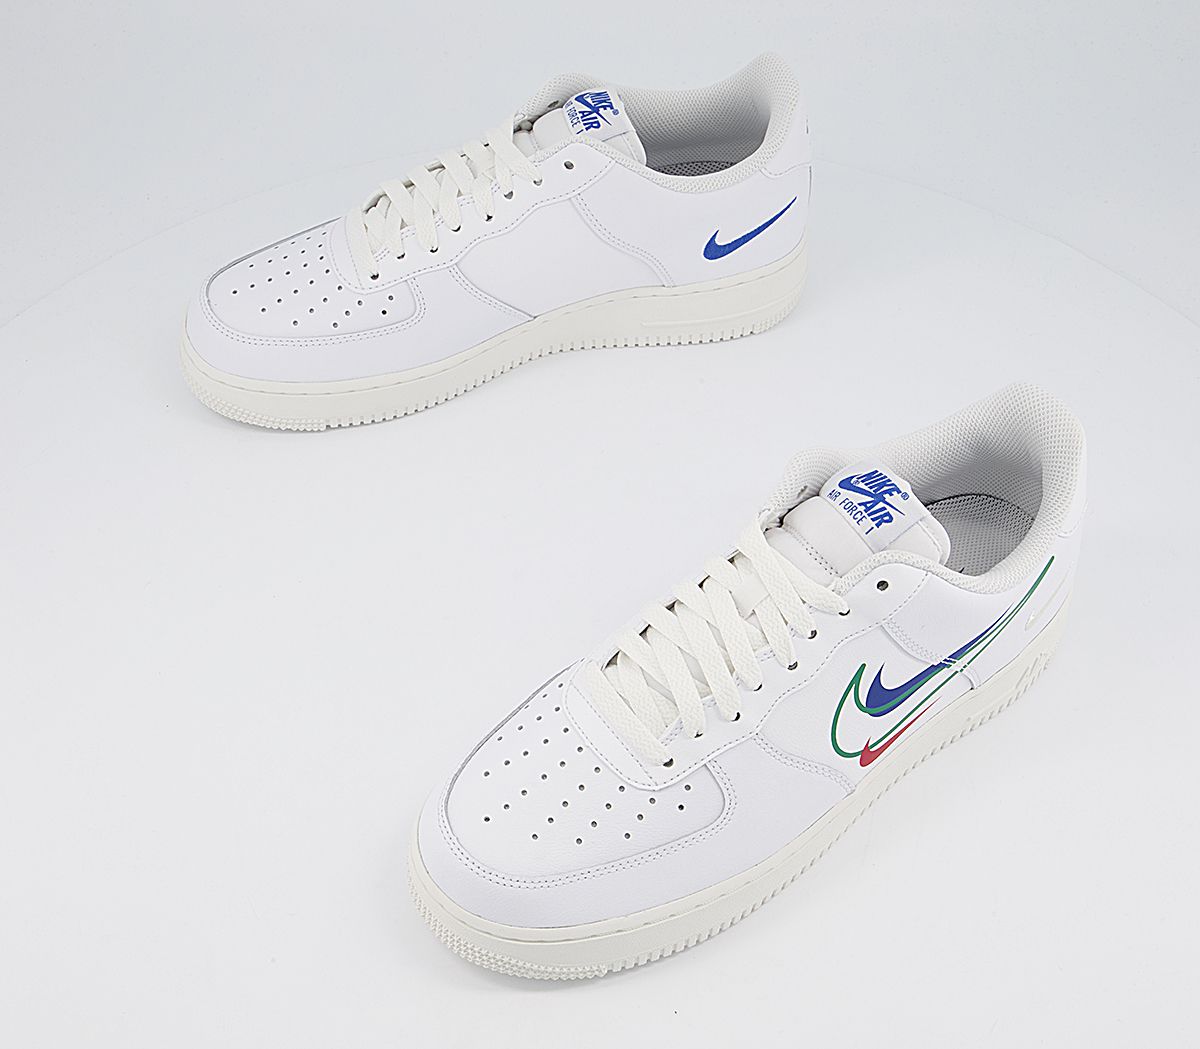 Nike Air Force 1 Lv8 Trainers White Green Noise Game Royal - His trainers